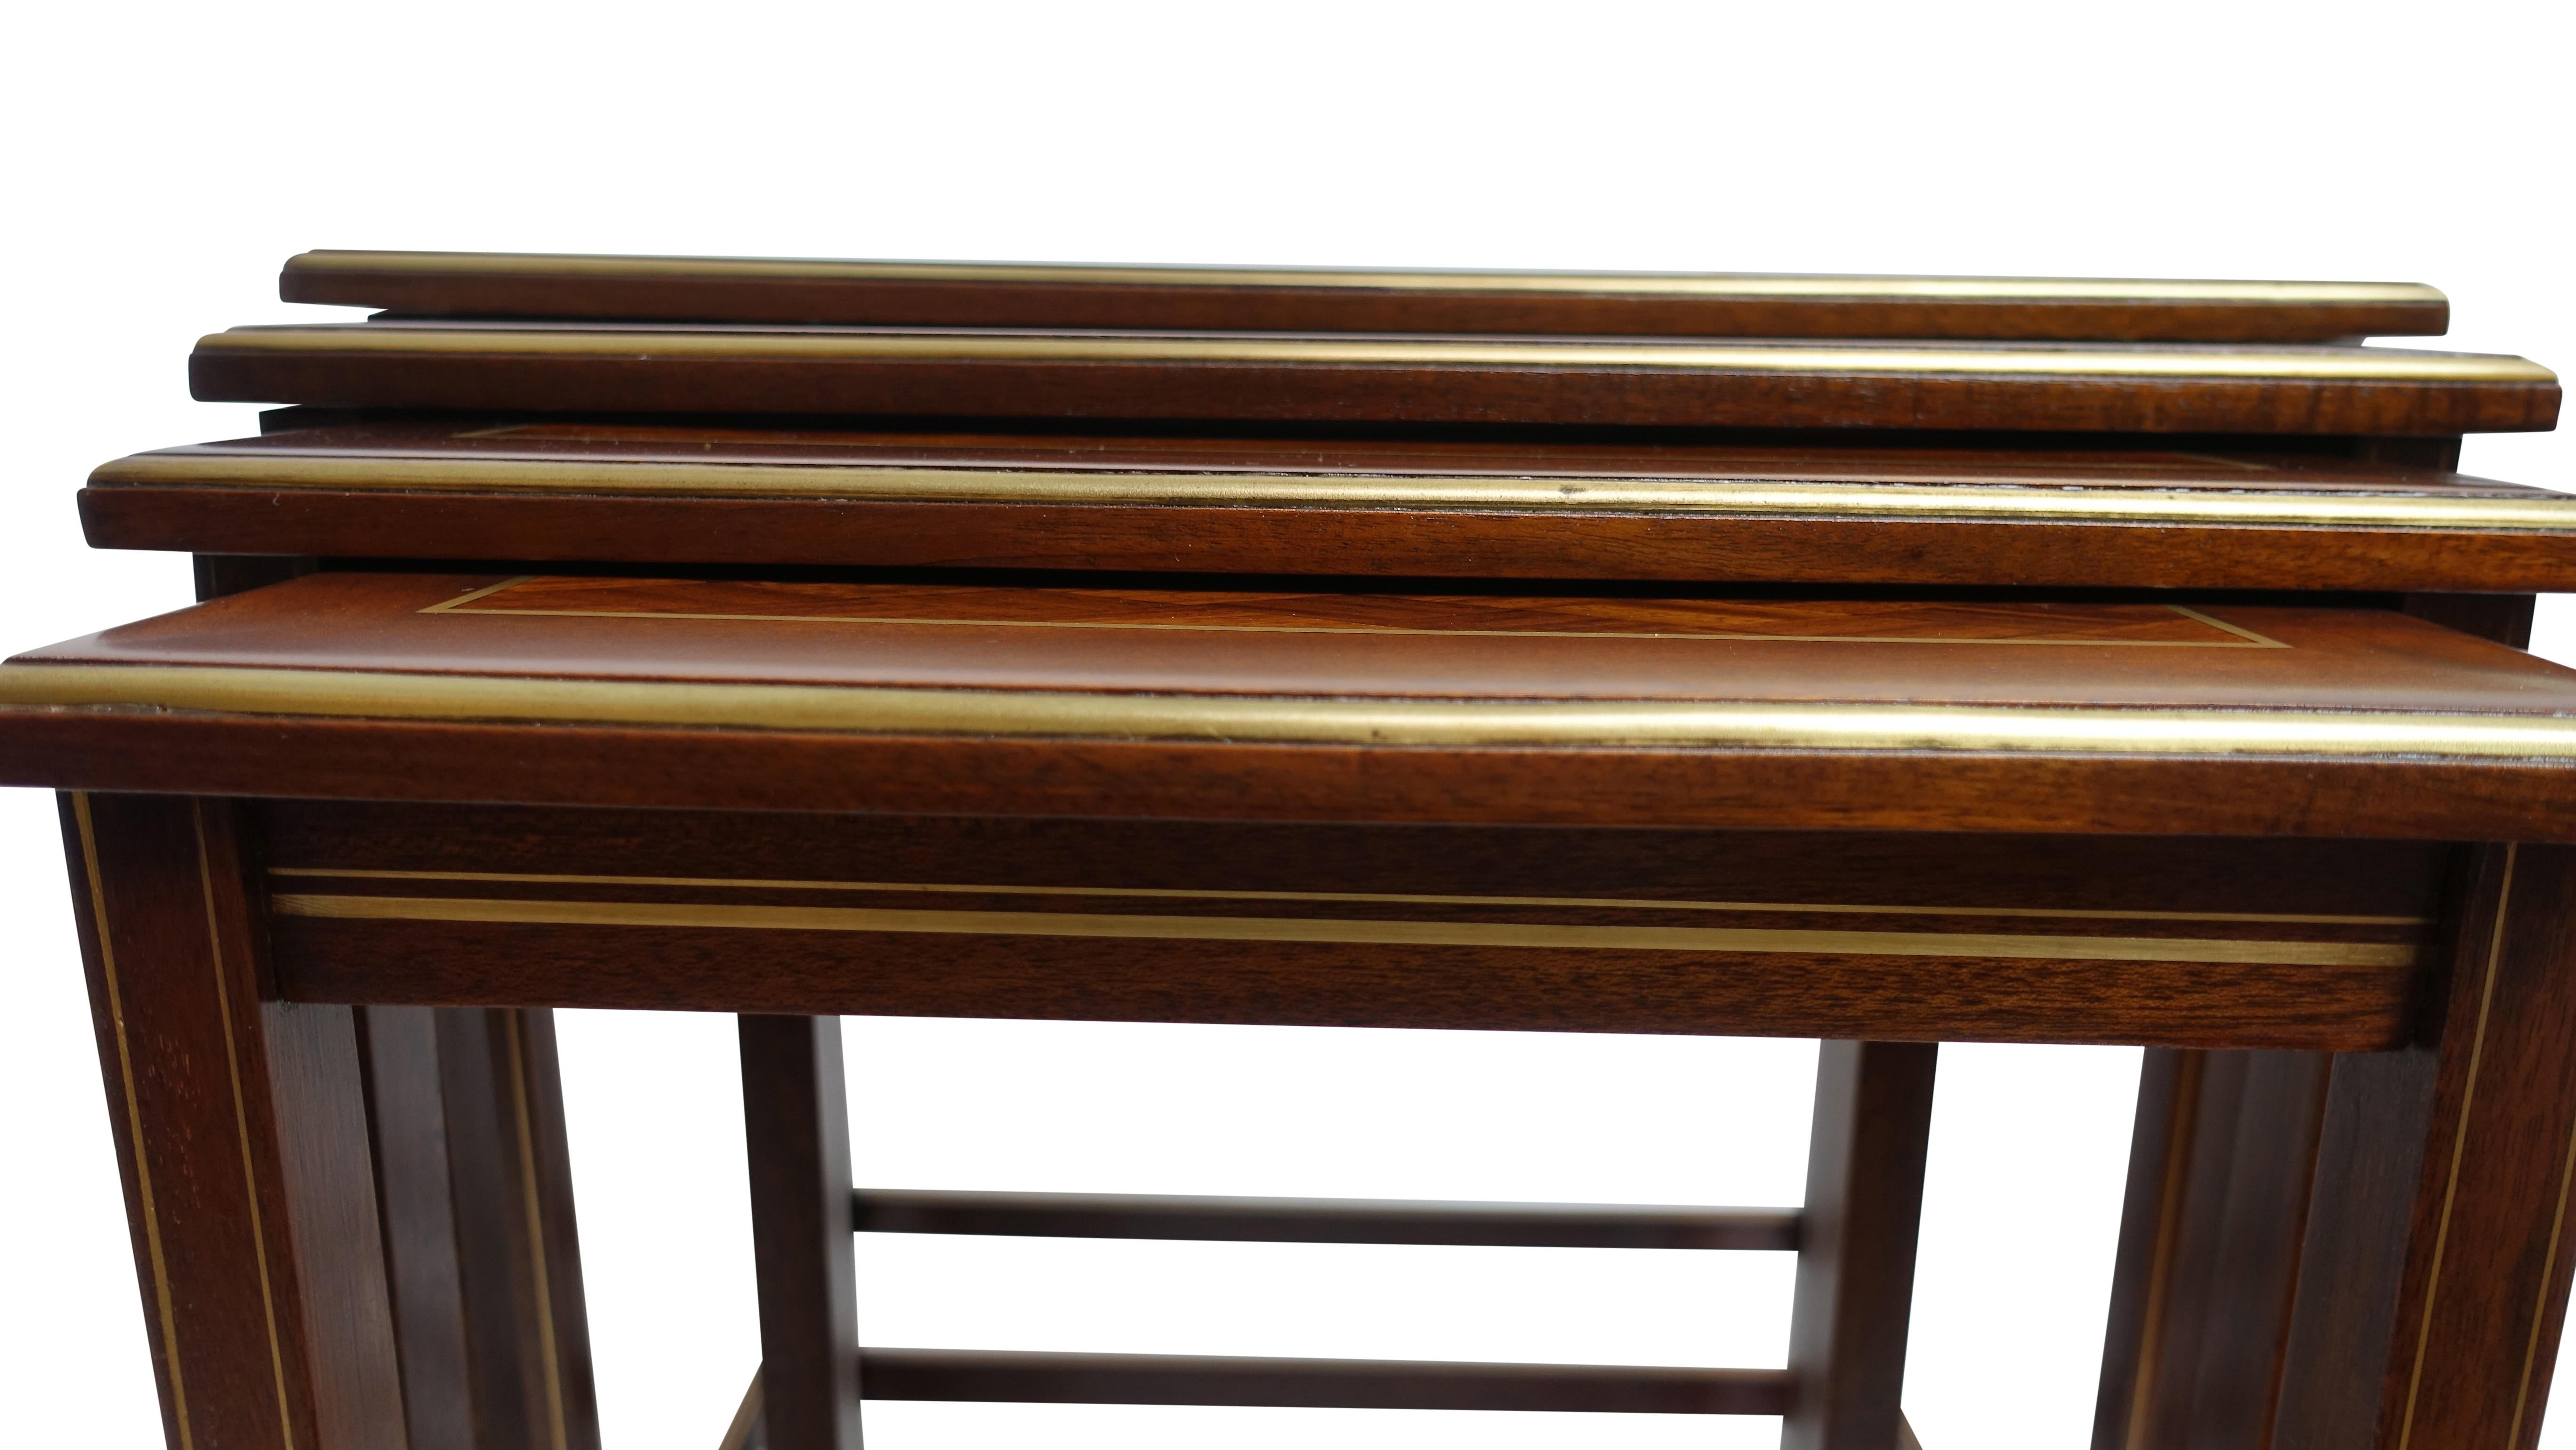 Set of Four Mahogany Nesting Tables with Brass Inlay and Trim, Mid-20th Century For Sale 3